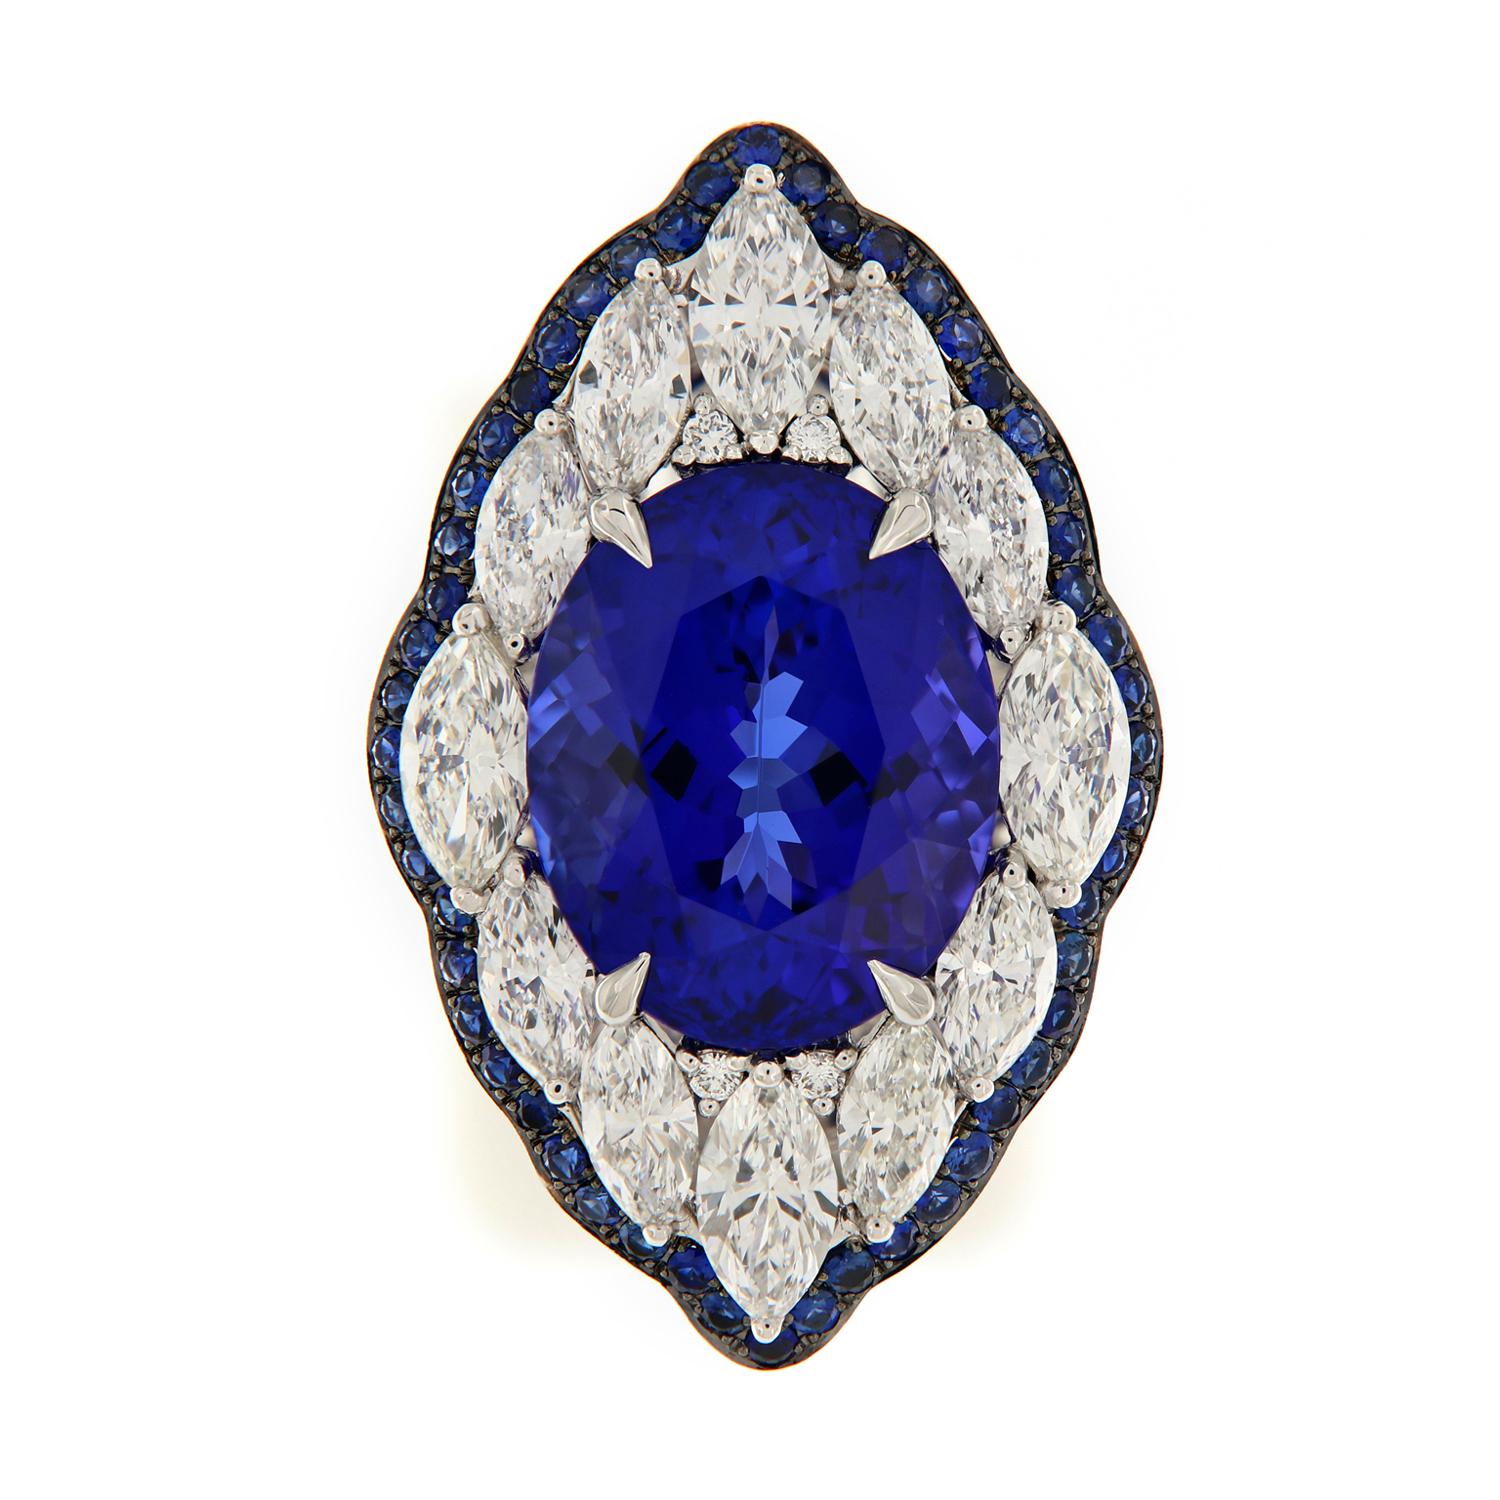 This stunning Tanzanite is the color that ALL other Tanzanites are judged by! It's perfectly complimented in this Art Deco styled ring with sapphire accents & VS, F-G marquise cut diamonds = 2.78 Cttw. Every part of this ring is detailed, even the